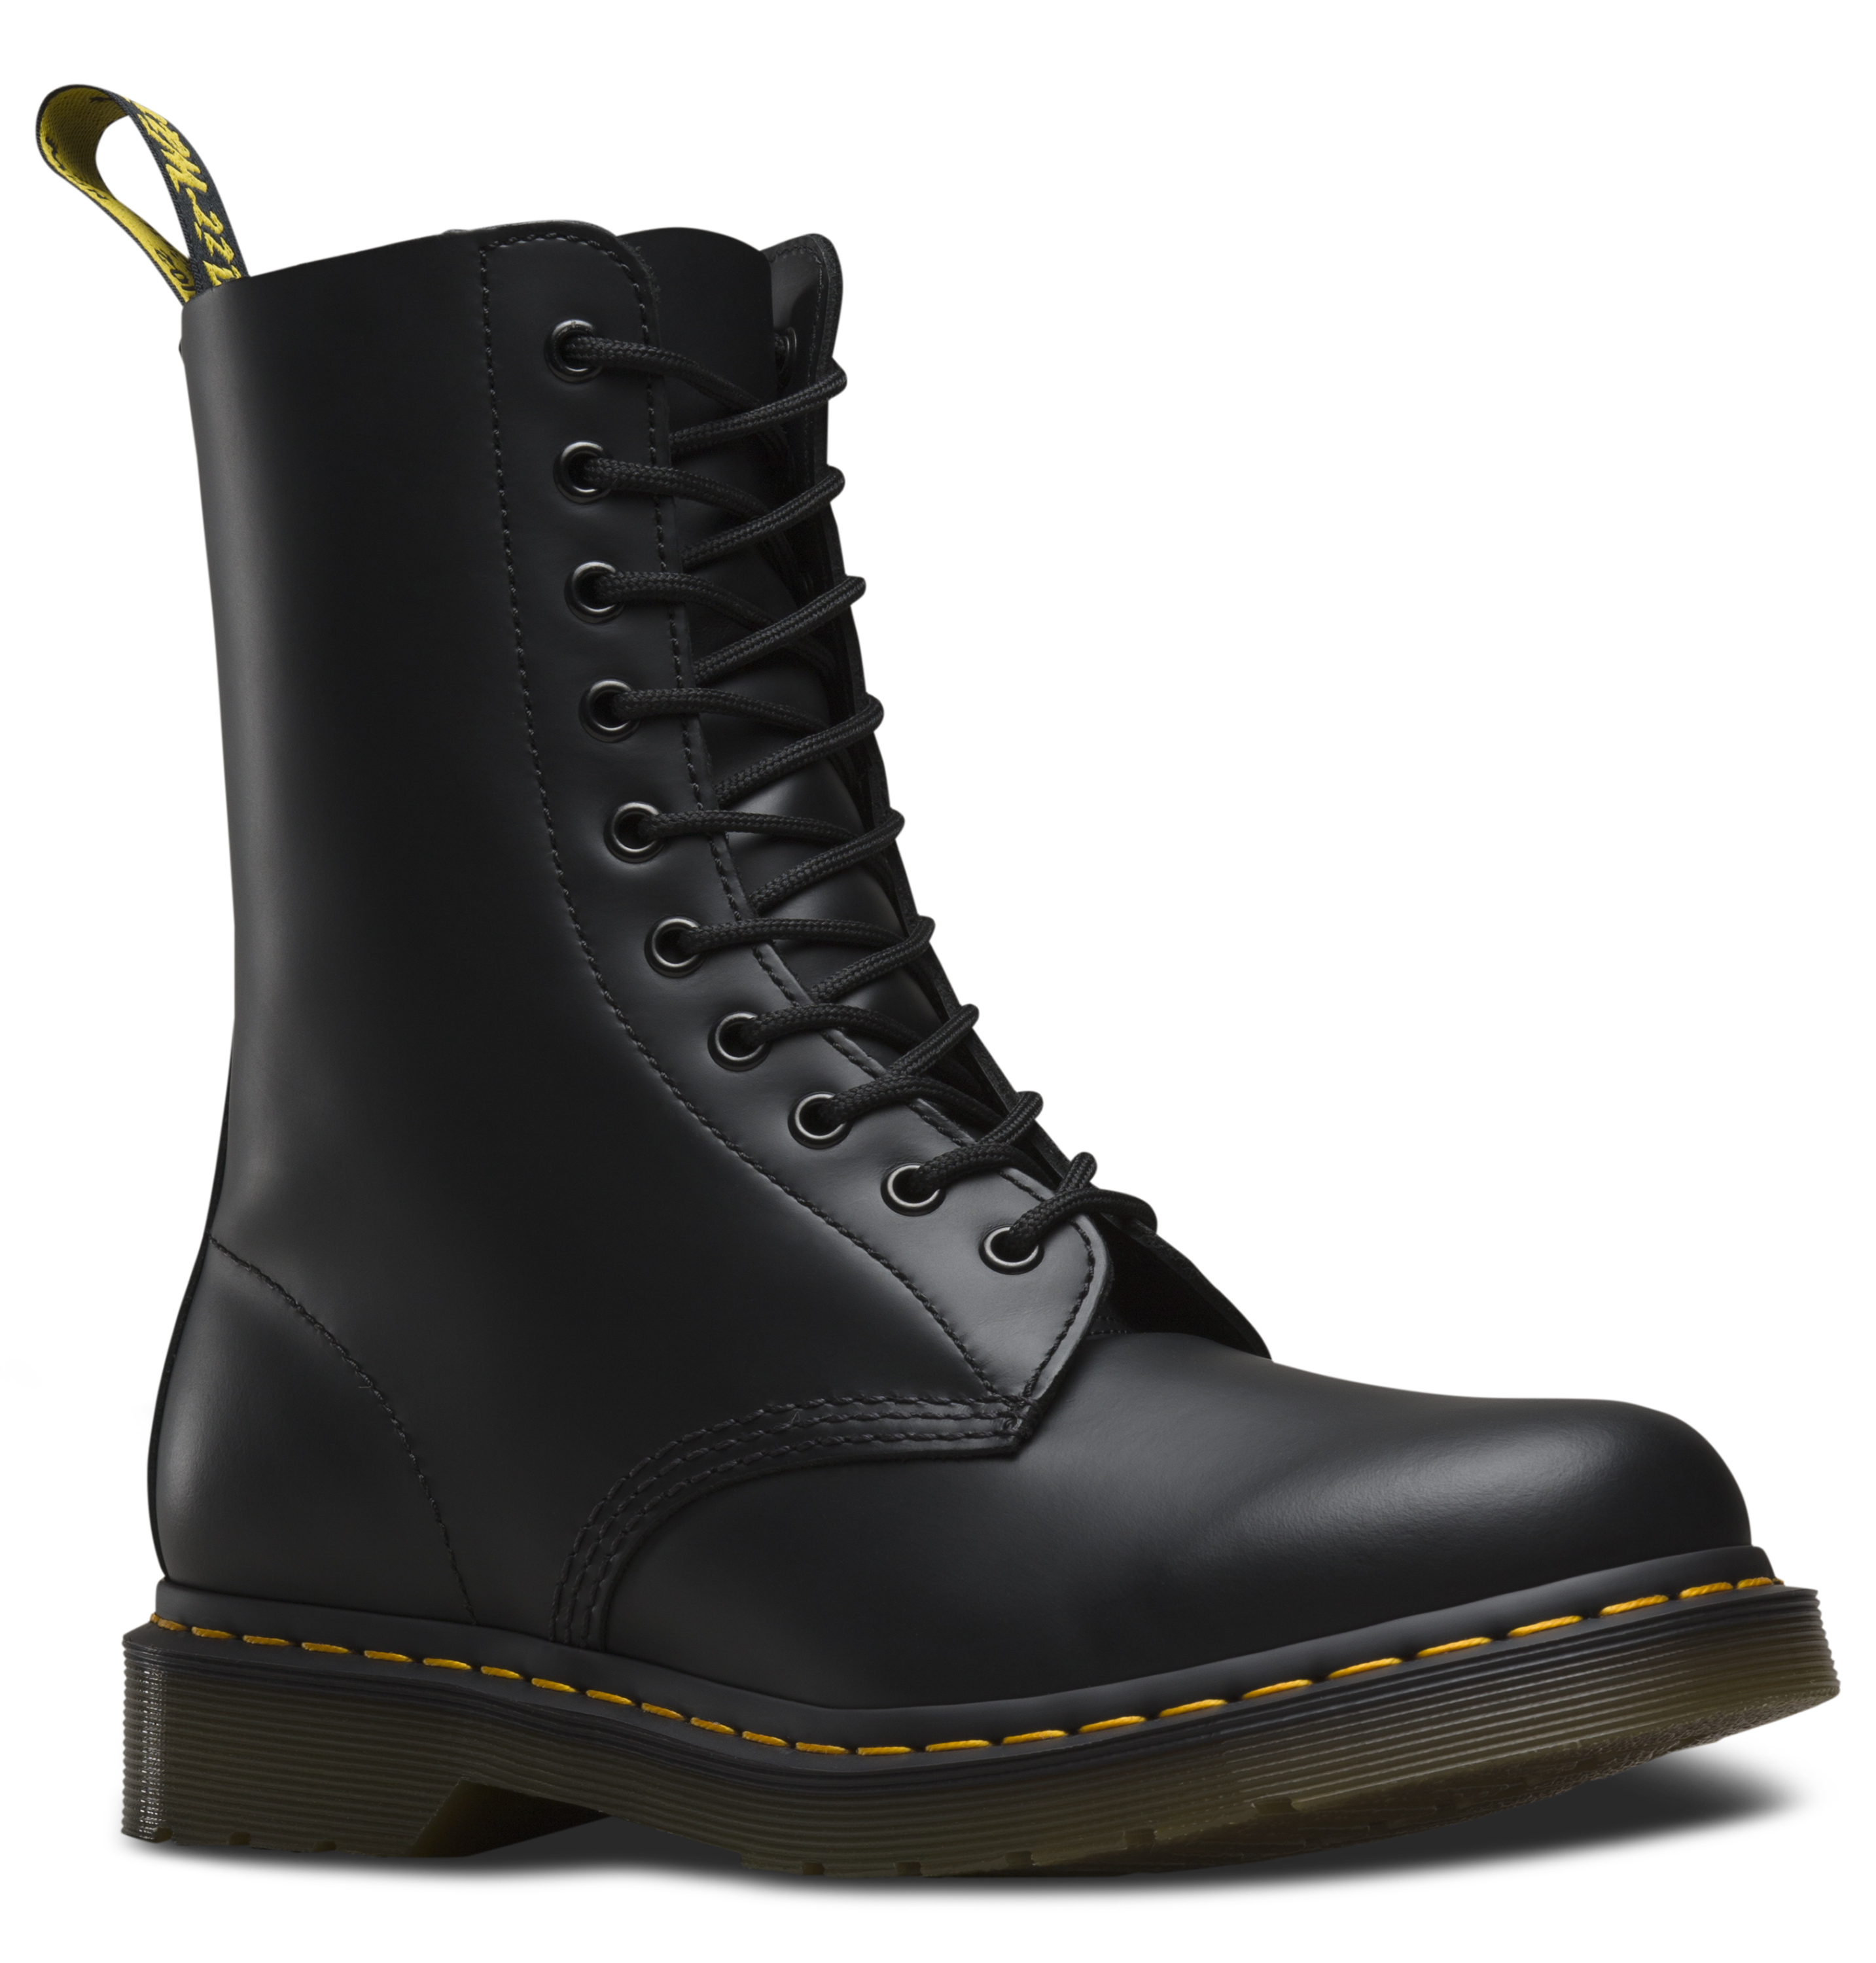 Dr Martens #1490 Boot | Great Pair Store